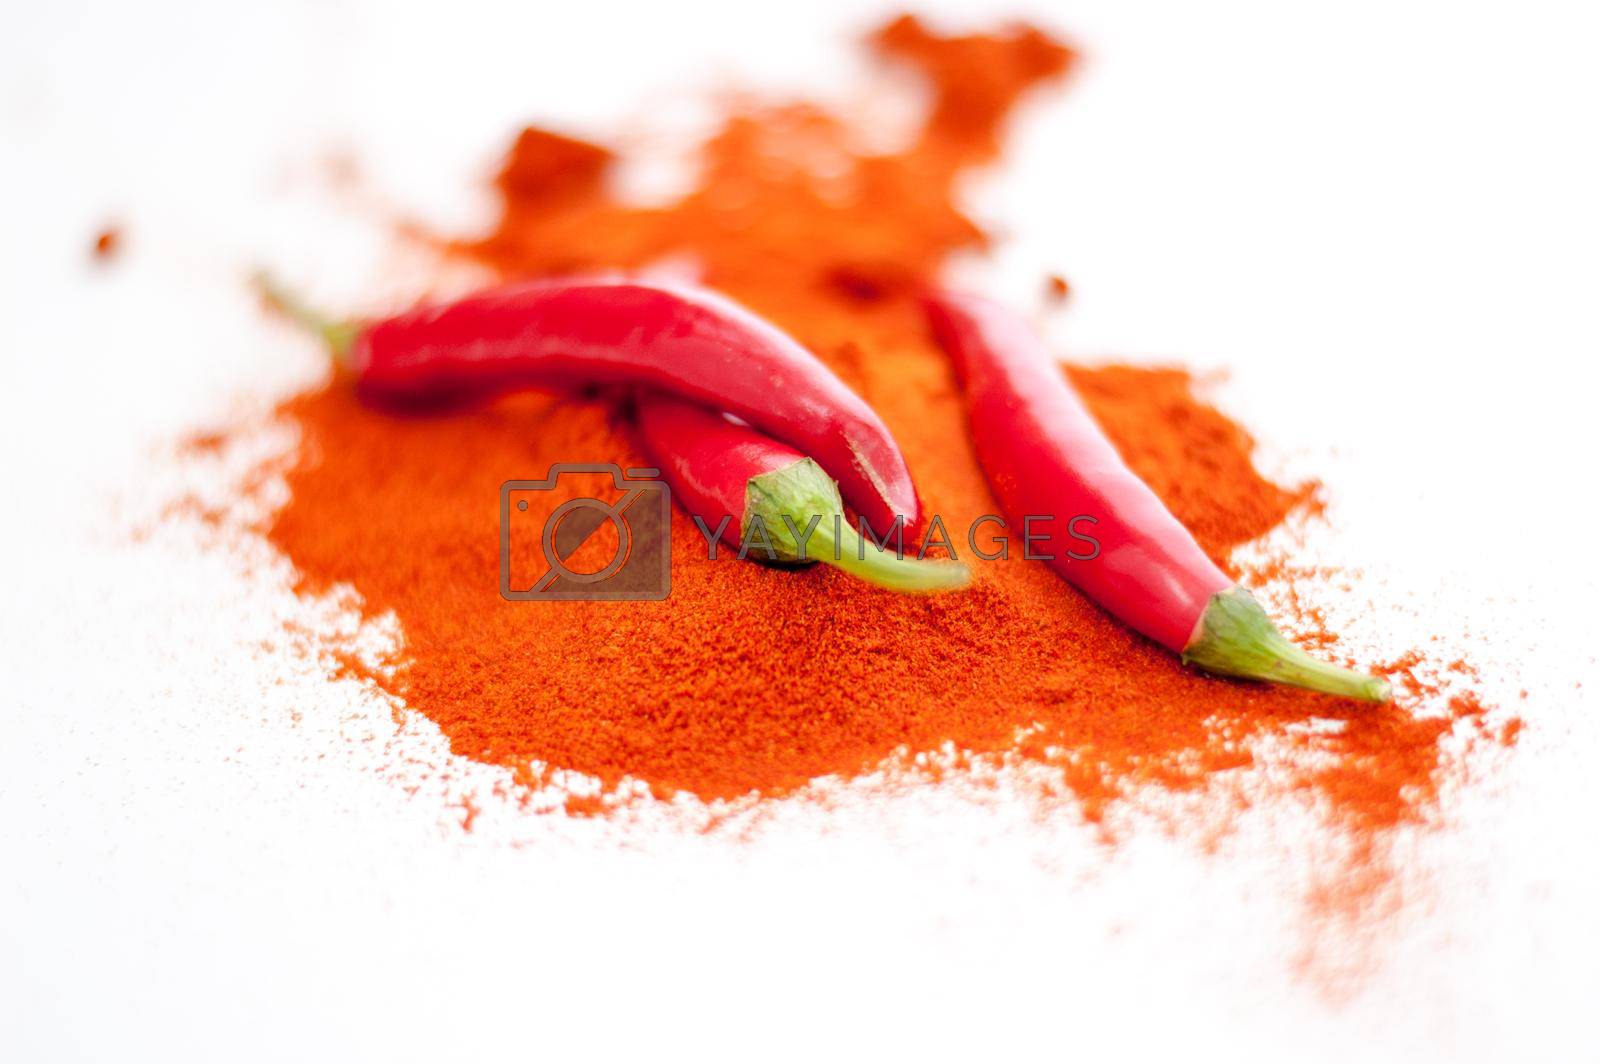 Royalty free image of fresh red hot pepper and powder on a white background by maramorosz